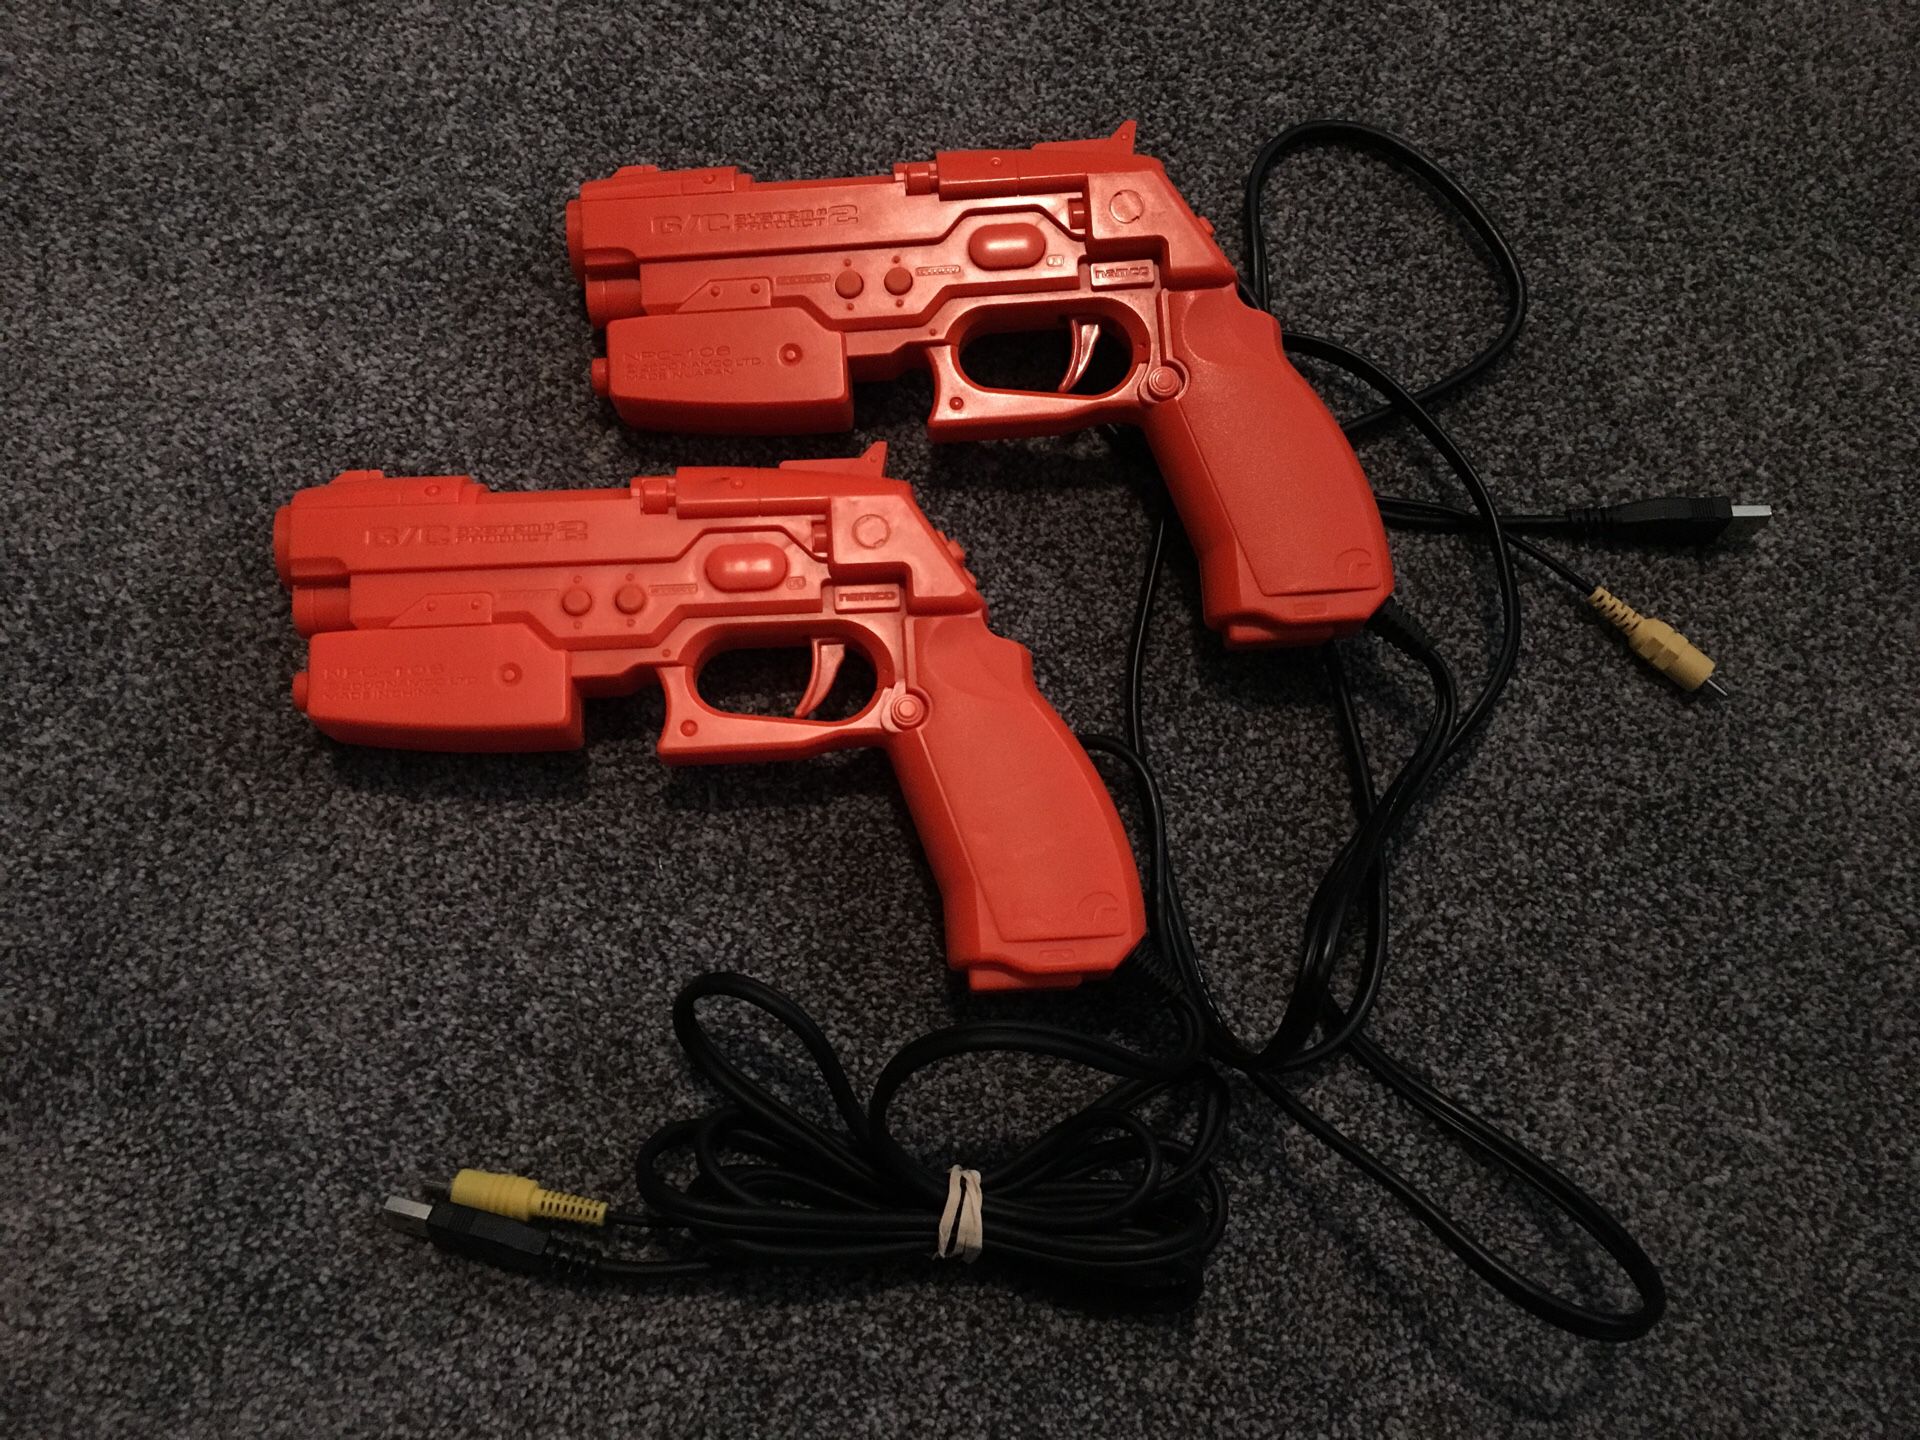 Udveksle Bølle Abundantly 2 PS2 NAMCO guncon light gun Playstation 2 controllers NPC-106 rare pair  for Sale in Seattle, WA - OfferUp